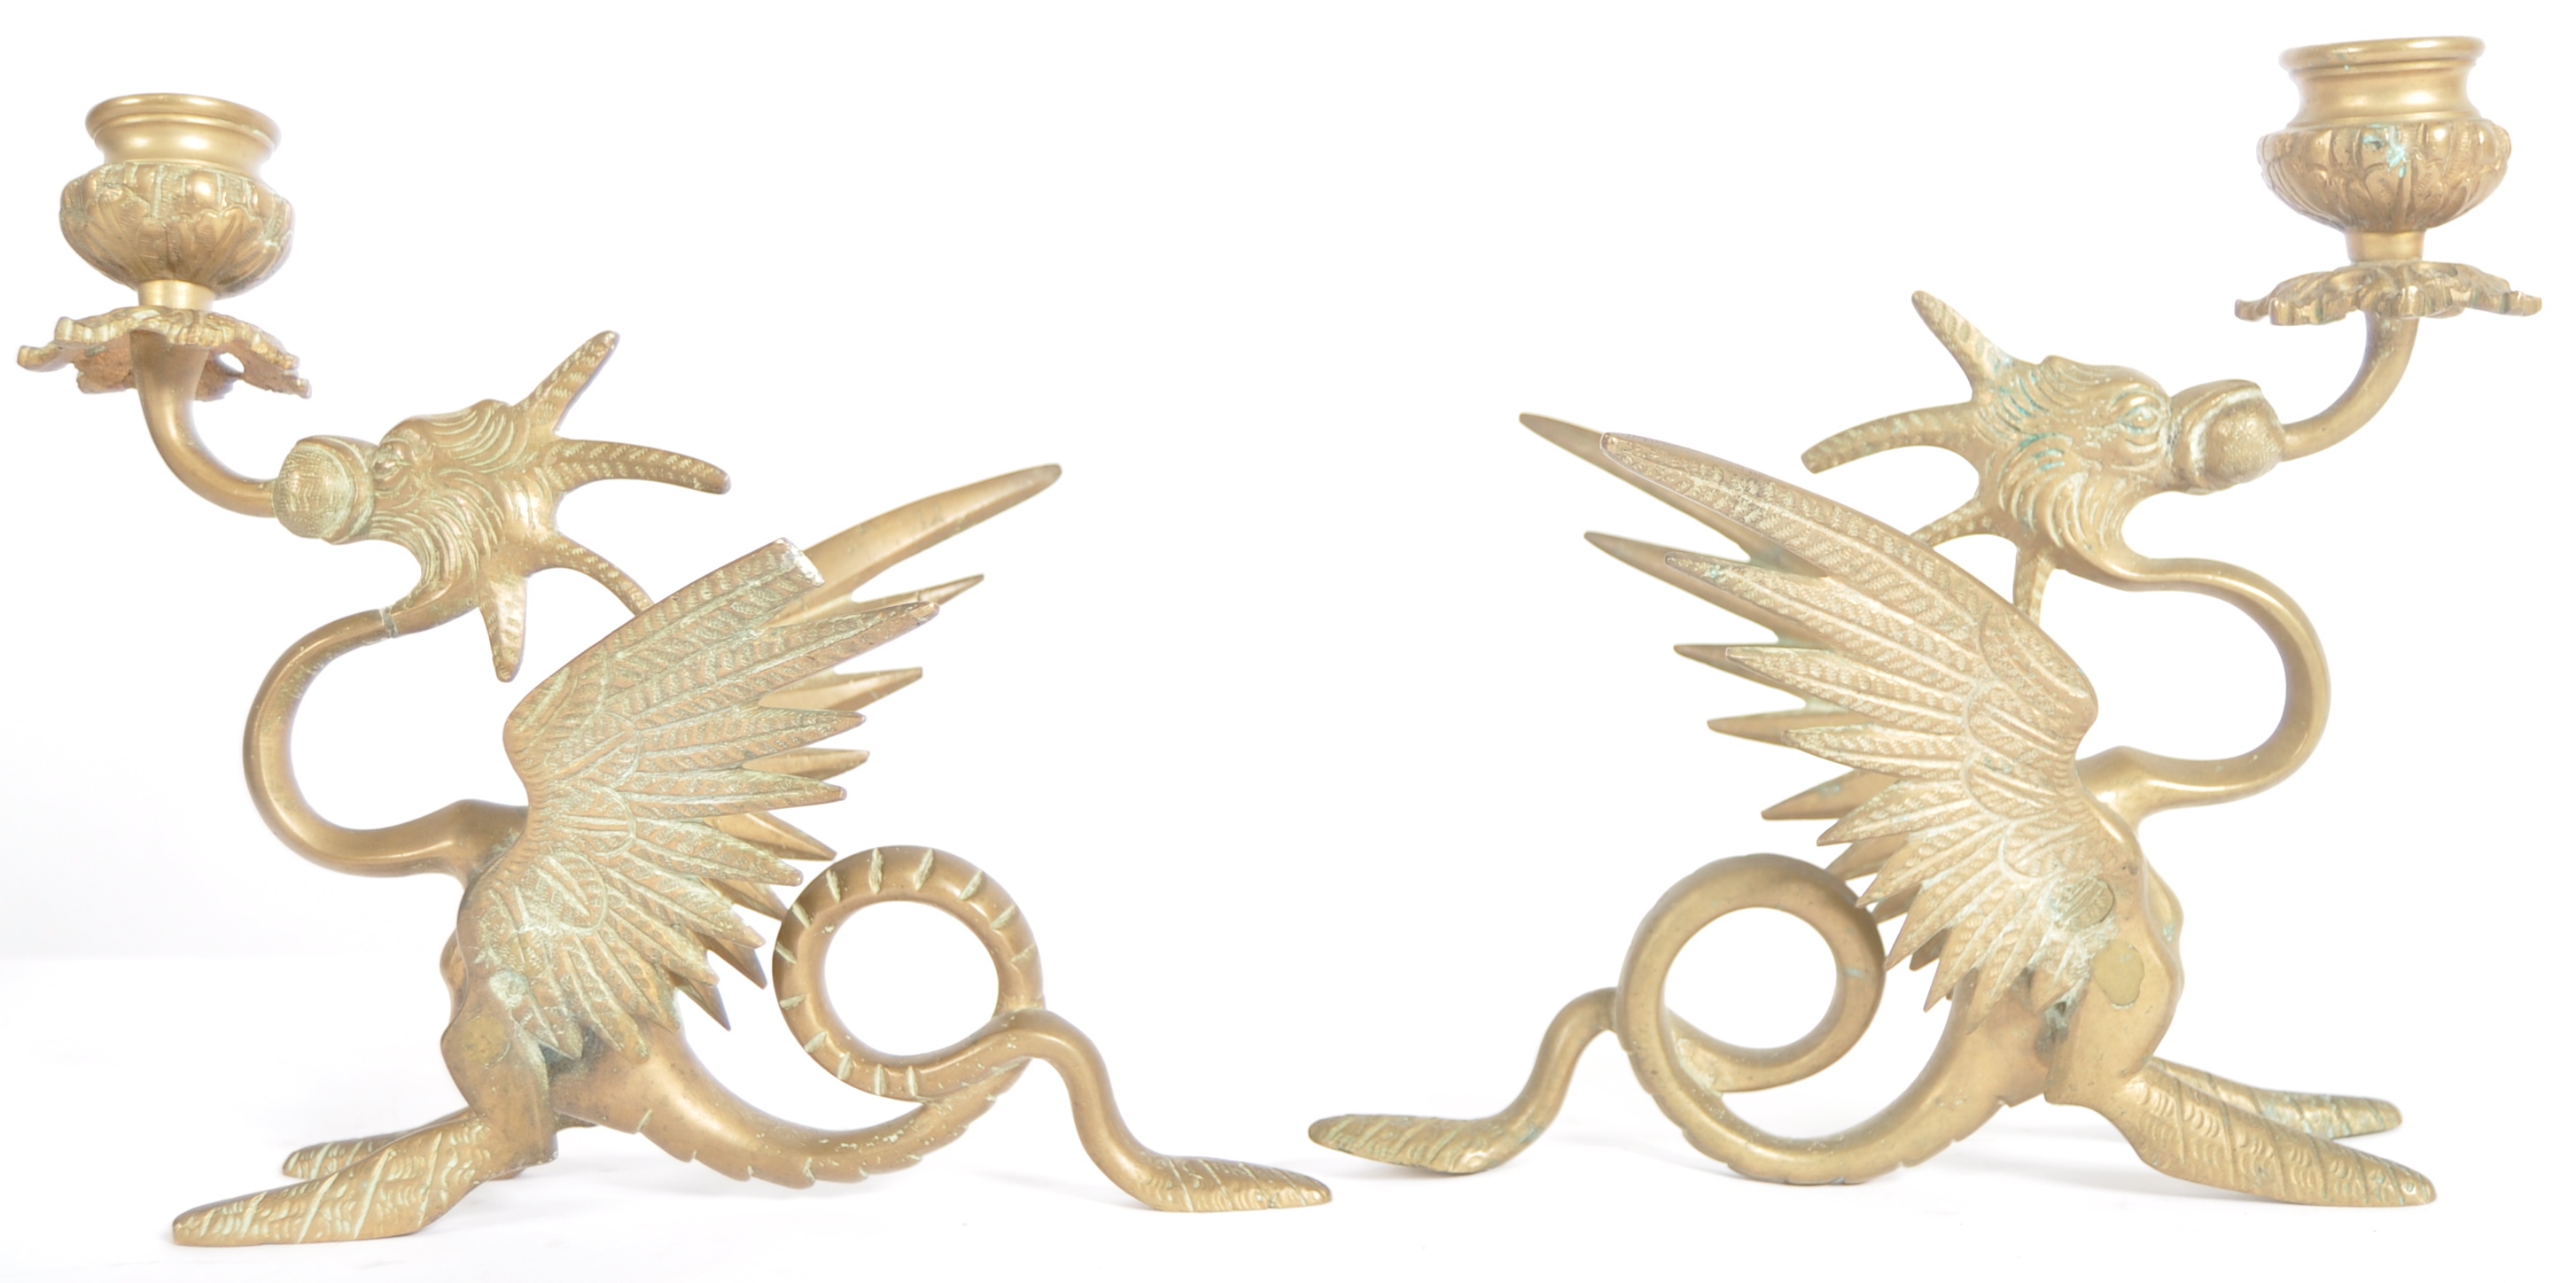 PAIR OF 19TH CENTURY BRASS GRIFFIN CANDLESTICKS - Image 5 of 7